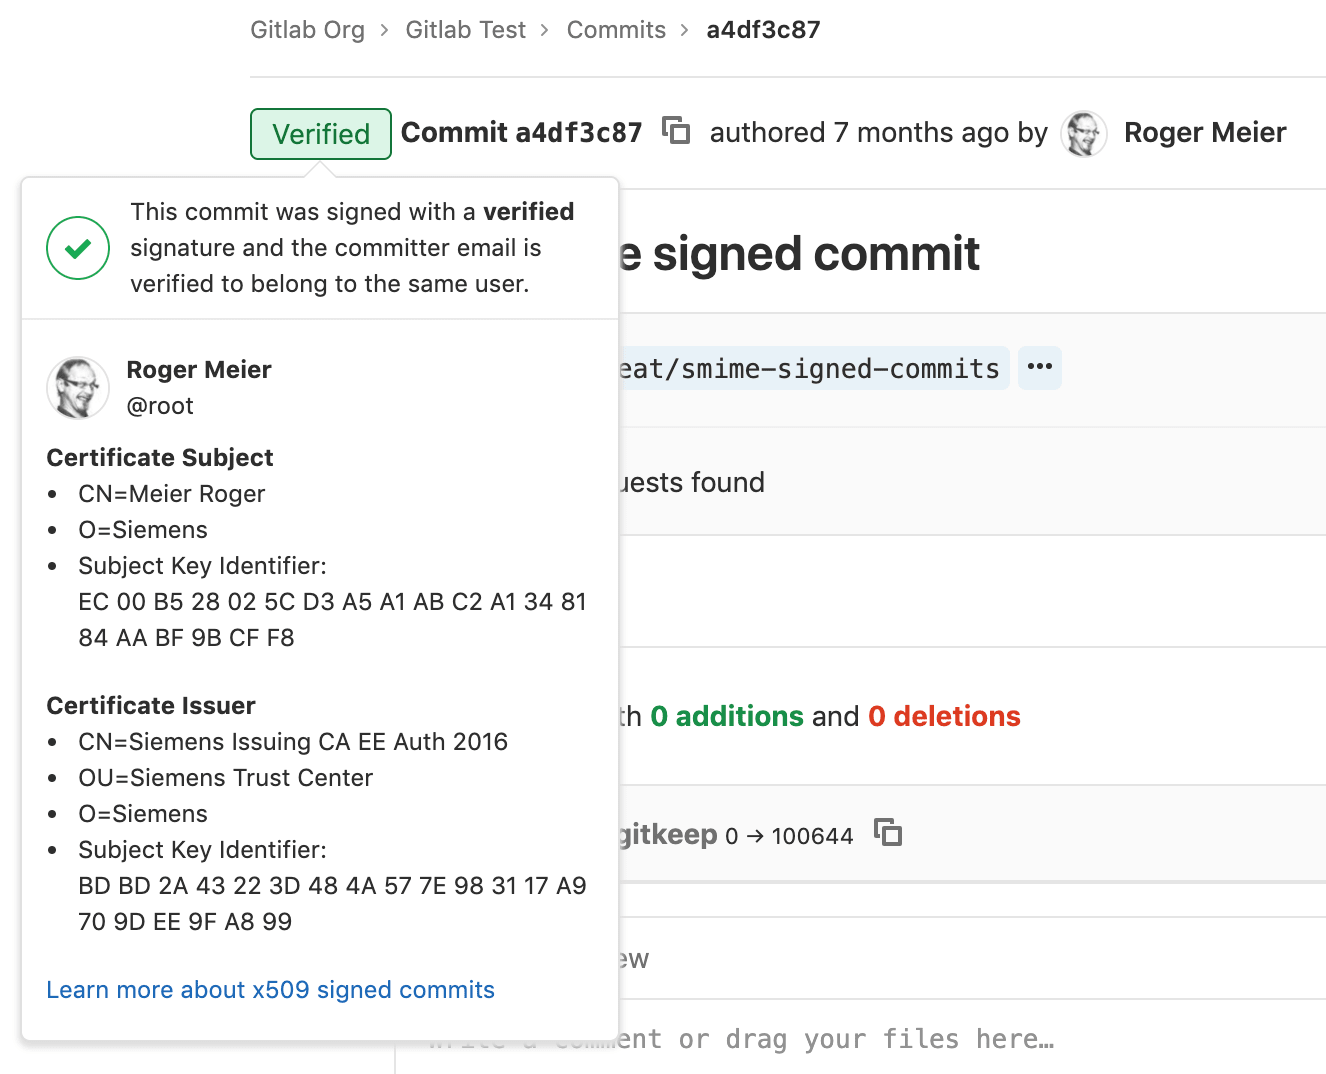 S/MIME Signature Verification of Commits